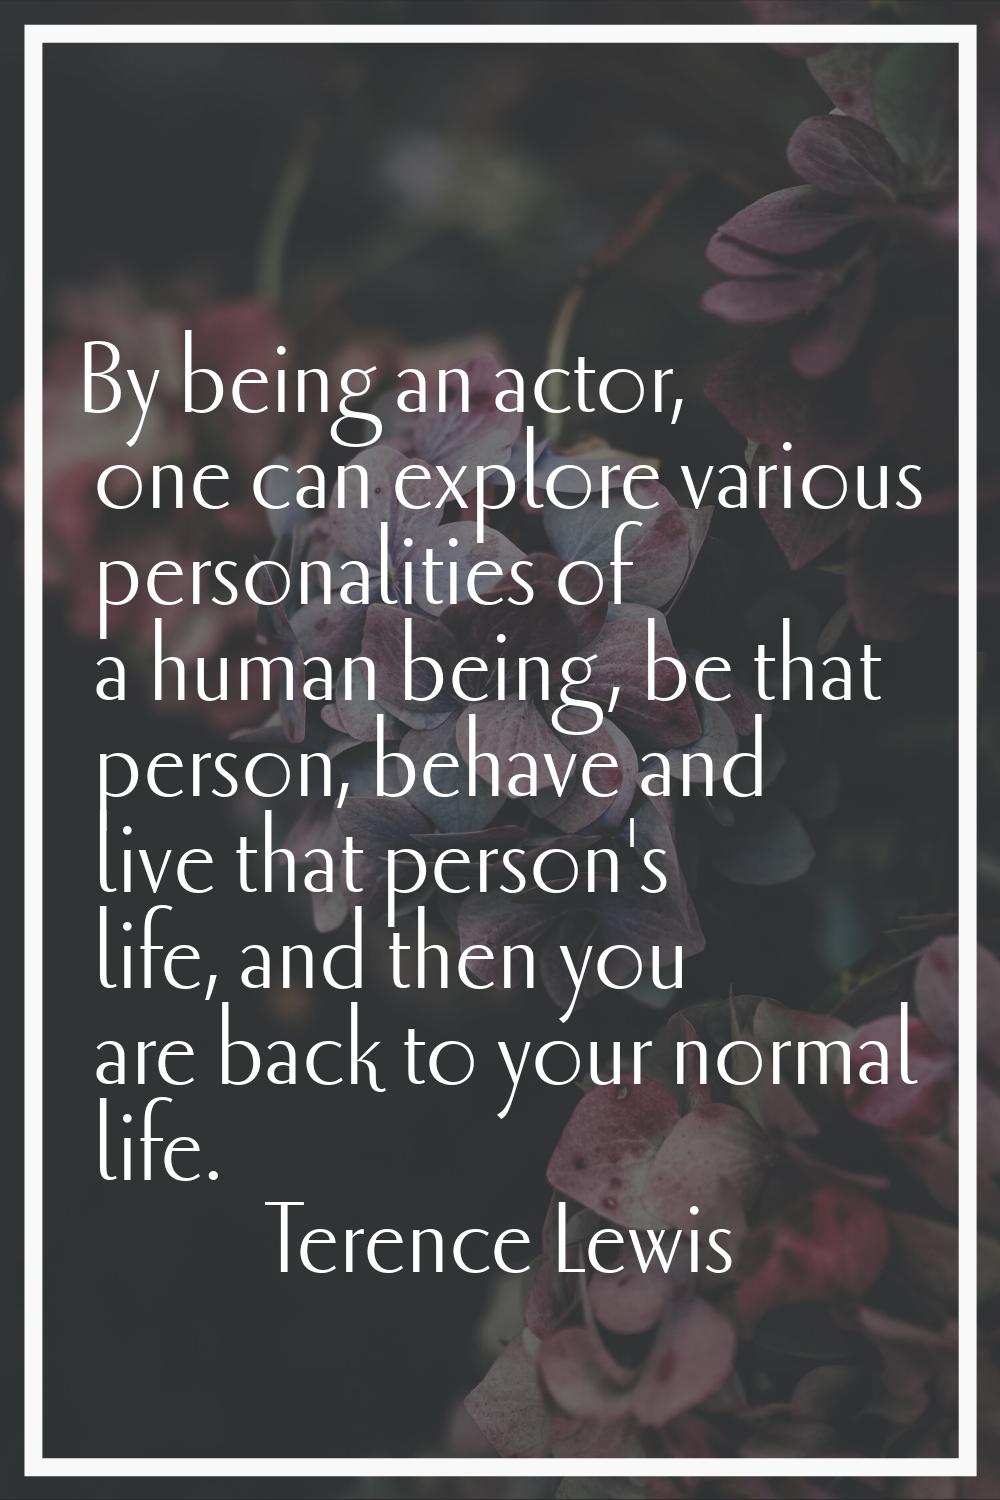 By being an actor, one can explore various personalities of a human being, be that person, behave a